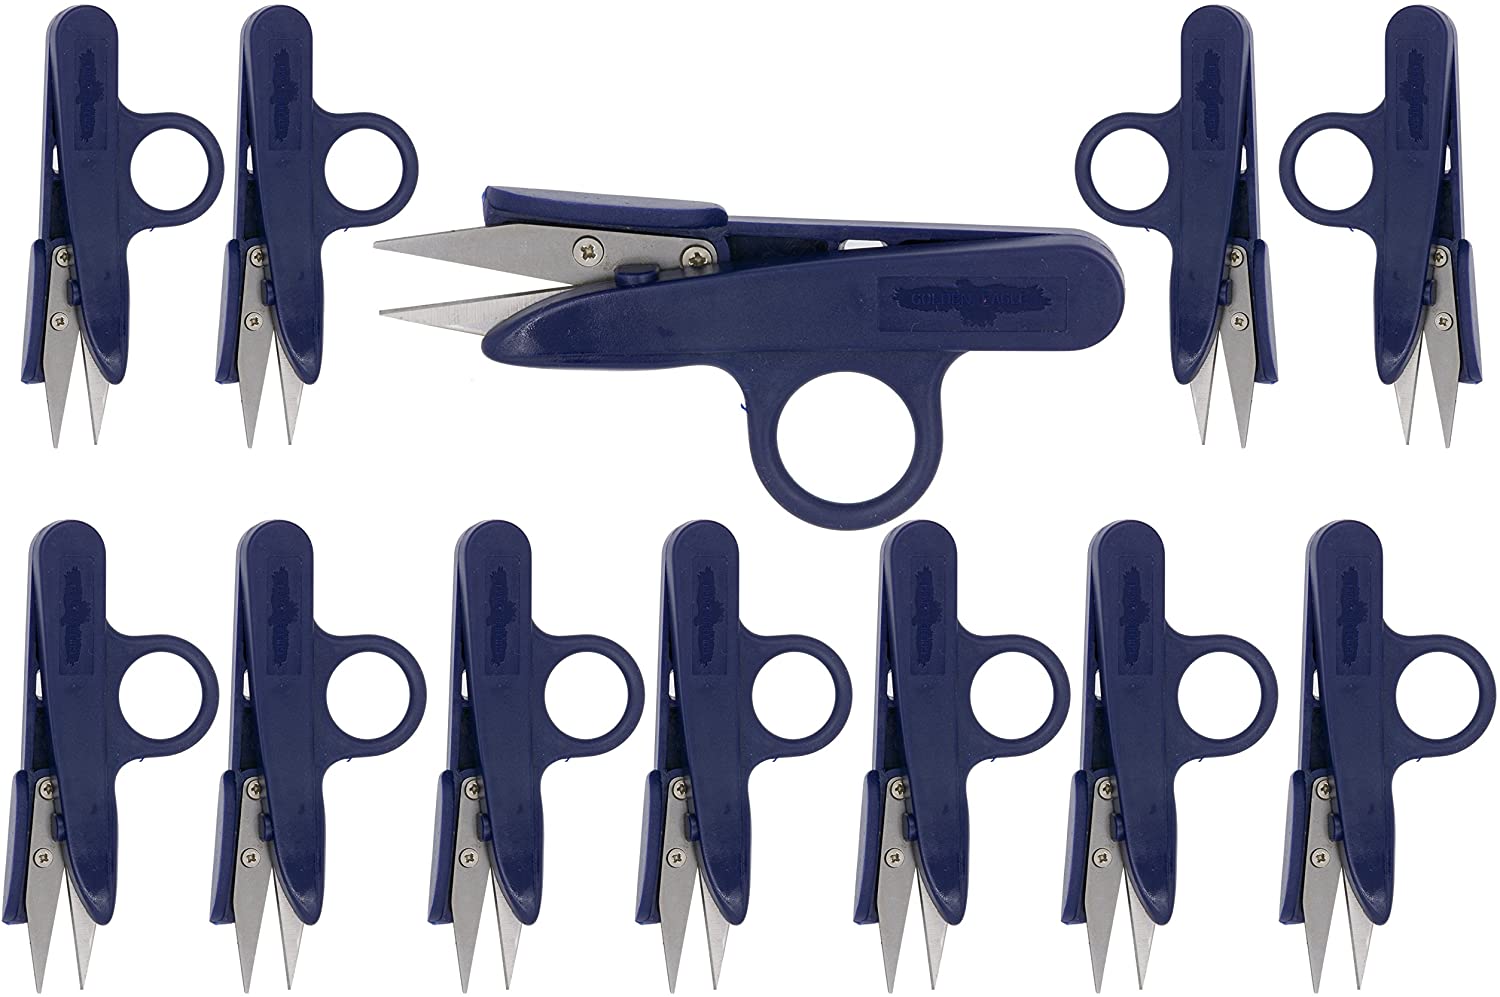 Golden Eagle Sharp Point Quick-Clip Lightweight Thread Snippers